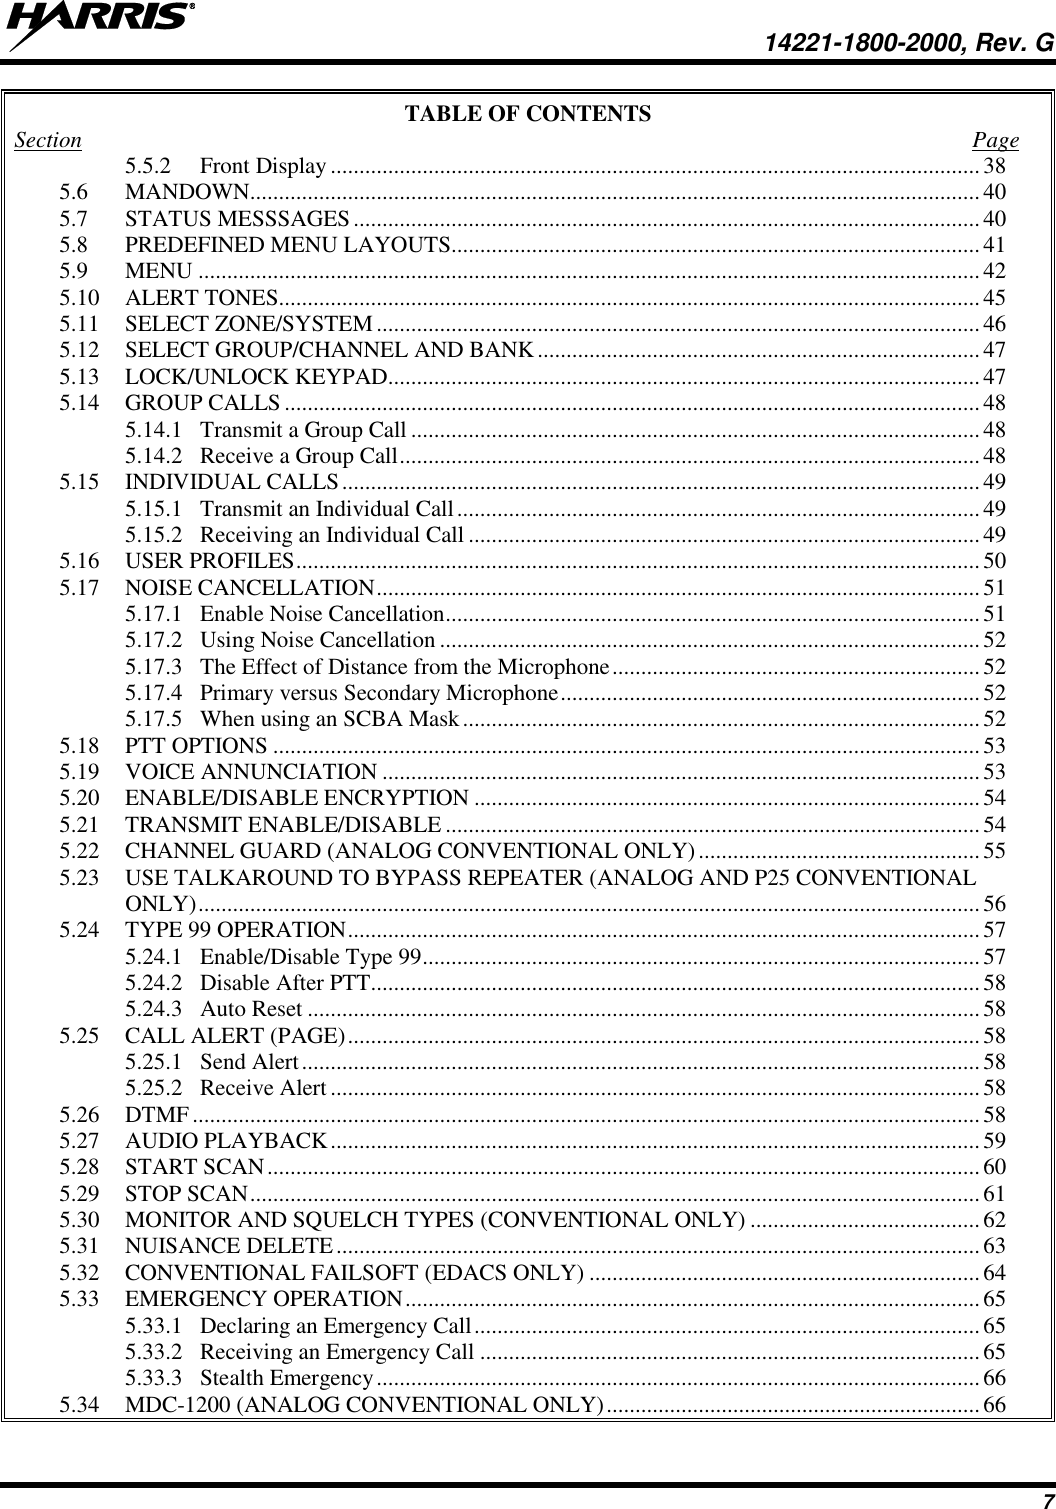   14221-1800-2000, Rev. G 7 TABLE OF CONTENTS Section  Page 5.5.2 Front Display ................................................................................................................. 38 5.6 MANDOWN............................................................................................................................... 40 5.7 STATUS MESSSAGES ............................................................................................................. 40 5.8 PREDEFINED MENU LAYOUTS............................................................................................ 41 5.9 MENU ........................................................................................................................................ 42 5.10 ALERT TONES.......................................................................................................................... 45 5.11 SELECT ZONE/SYSTEM ......................................................................................................... 46 5.12 SELECT GROUP/CHANNEL AND BANK ............................................................................. 47 5.13 LOCK/UNLOCK KEYPAD....................................................................................................... 47 5.14 GROUP CALLS ......................................................................................................................... 48 5.14.1 Transmit a Group Call ................................................................................................... 48 5.14.2 Receive a Group Call ..................................................................................................... 48 5.15 INDIVIDUAL CALLS ............................................................................................................... 49 5.15.1 Transmit an Individual Call ........................................................................................... 49 5.15.2 Receiving an Individual Call ......................................................................................... 49 5.16 USER PROFILES ....................................................................................................................... 50 5.17 NOISE CANCELLATION ......................................................................................................... 51 5.17.1 Enable Noise Cancellation ............................................................................................. 51 5.17.2 Using Noise Cancellation .............................................................................................. 52 5.17.3 The Effect of Distance from the Microphone ................................................................ 52 5.17.4 Primary versus Secondary Microphone ......................................................................... 52 5.17.5 When using an SCBA Mask .......................................................................................... 52 5.18 PTT OPTIONS ........................................................................................................................... 53 5.19 VOICE ANNUNCIATION ........................................................................................................ 53 5.20 ENABLE/DISABLE ENCRYPTION ........................................................................................ 54 5.21 TRANSMIT ENABLE/DISABLE ............................................................................................. 54 5.22 CHANNEL GUARD (ANALOG CONVENTIONAL ONLY) ................................................. 55 5.23 USE TALKAROUND TO BYPASS REPEATER (ANALOG AND P25 CONVENTIONAL ONLY) ........................................................................................................................................ 56 5.24 TYPE 99 OPERATION .............................................................................................................. 57 5.24.1 Enable/Disable Type 99 ................................................................................................. 57 5.24.2 Disable After PTT.......................................................................................................... 58 5.24.3 Auto Reset ..................................................................................................................... 58 5.25 CALL ALERT (PAGE) .............................................................................................................. 58 5.25.1 Send Alert ...................................................................................................................... 58 5.25.2 Receive Alert ................................................................................................................. 58 5.26 DTMF ......................................................................................................................................... 58 5.27 AUDIO PLAYBACK ................................................................................................................. 59 5.28 START SCAN ............................................................................................................................ 60 5.29 STOP SCAN ............................................................................................................................... 61 5.30 MONITOR AND SQUELCH TYPES (CONVENTIONAL ONLY) ........................................ 62 5.31 NUISANCE DELETE ................................................................................................................ 63 5.32 CONVENTIONAL FAILSOFT (EDACS ONLY) .................................................................... 64 5.33 EMERGENCY OPERATION .................................................................................................... 65 5.33.1 Declaring an Emergency Call ........................................................................................ 65 5.33.2 Receiving an Emergency Call ....................................................................................... 65 5.33.3 Stealth Emergency ......................................................................................................... 66 5.34 MDC-1200 (ANALOG CONVENTIONAL ONLY) ................................................................. 66 